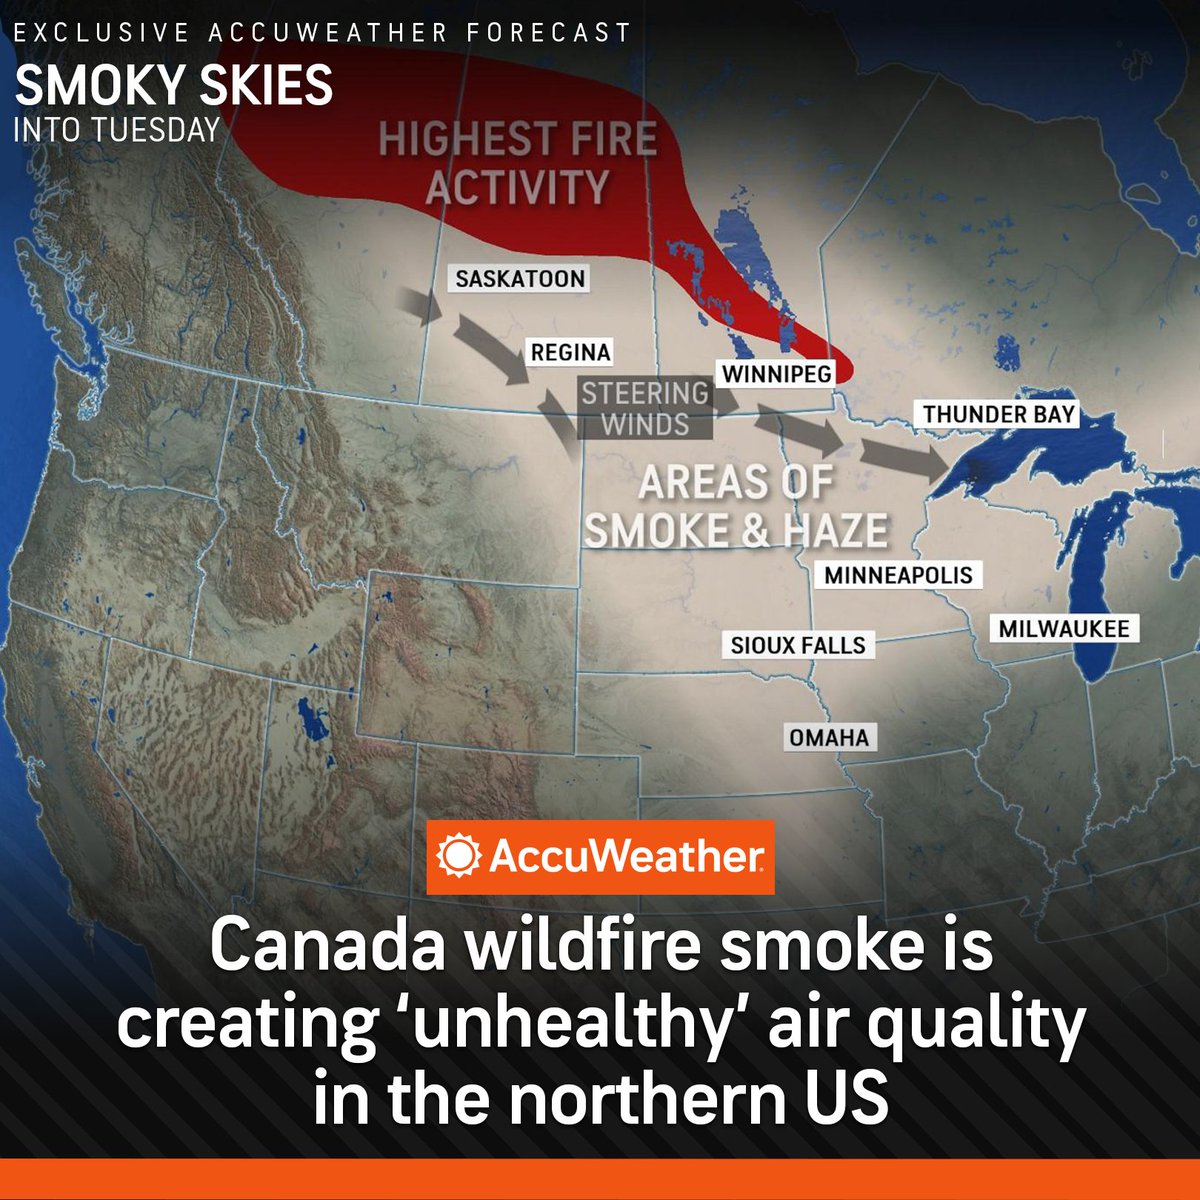 Smoke from Canadian wildfires is back and is spreading over part of the northern United States, including Minneapolis, and it could spread farther throughout the week. bit.ly/3UGNhDL